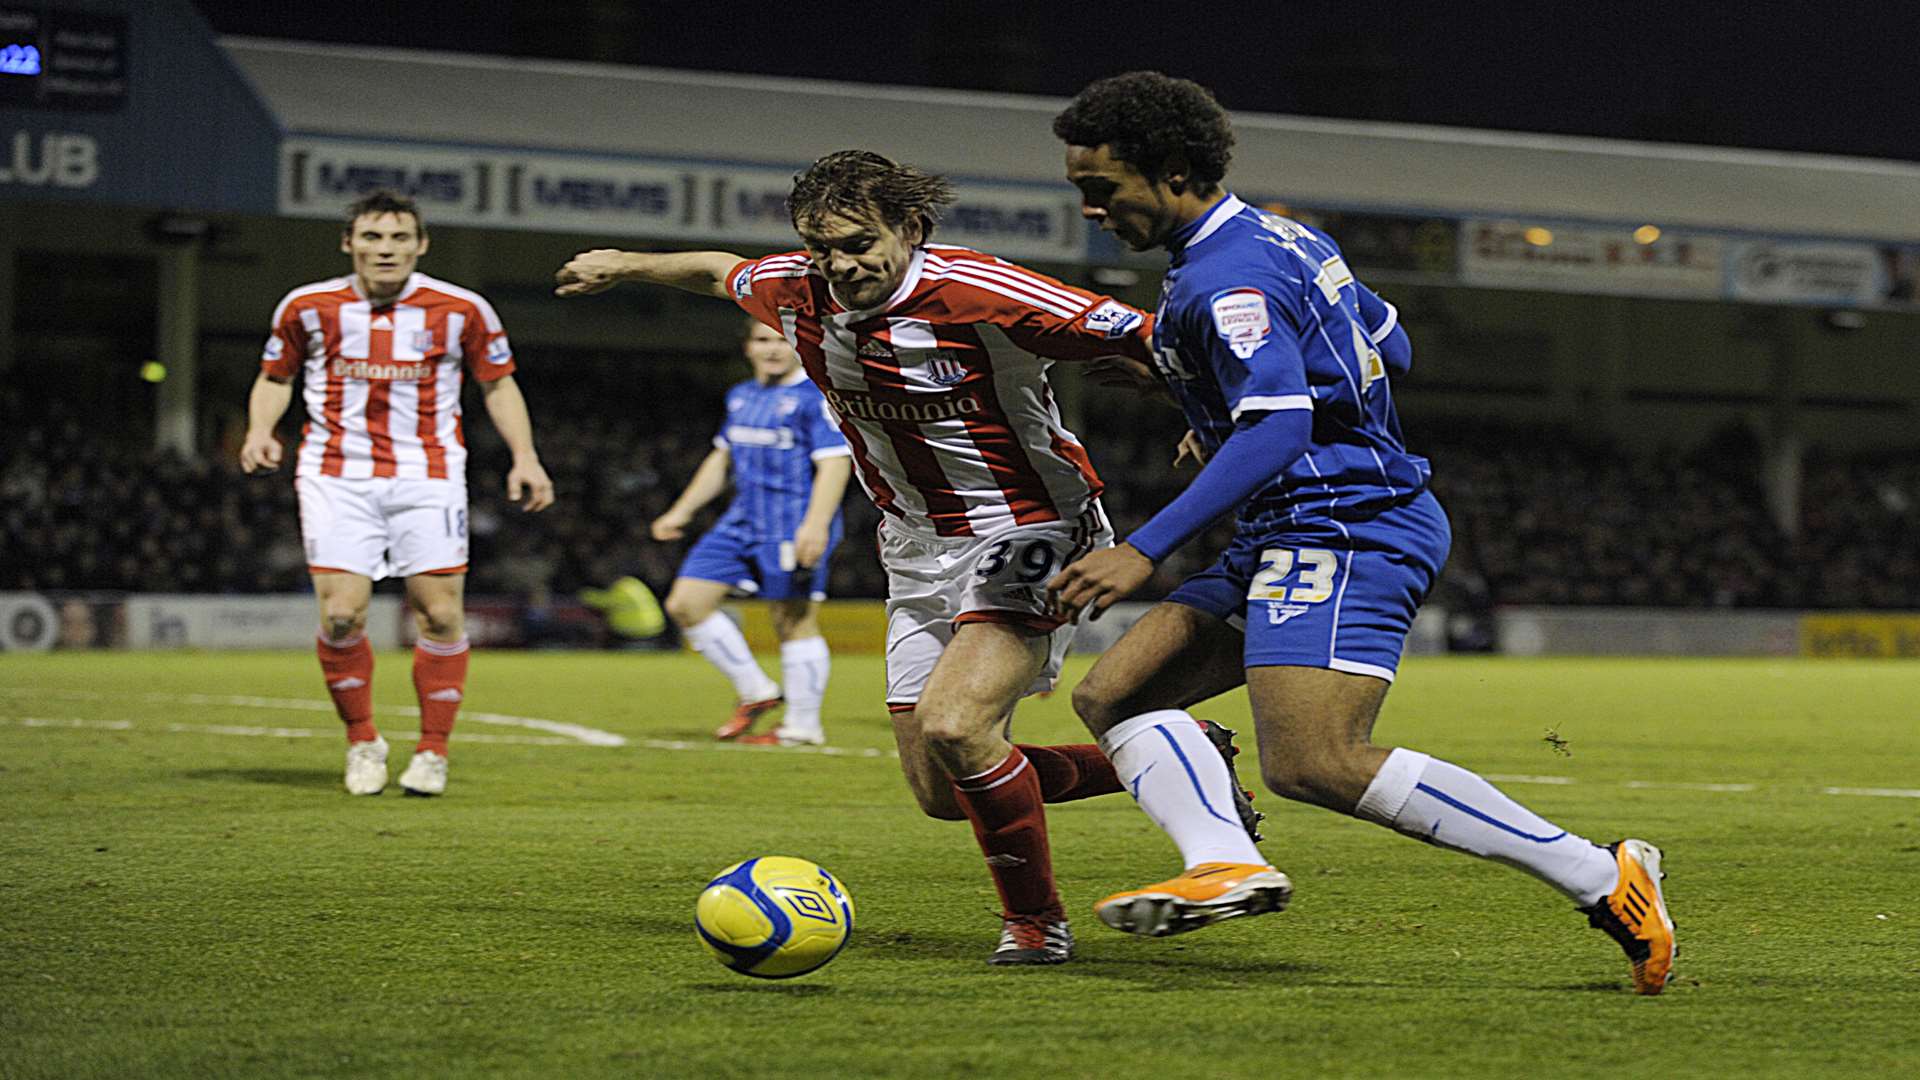 Stefan Payne in action for Gillingham in the FA Cup third round clash against Stoke City in 2012. Picture: Barry Goodwin